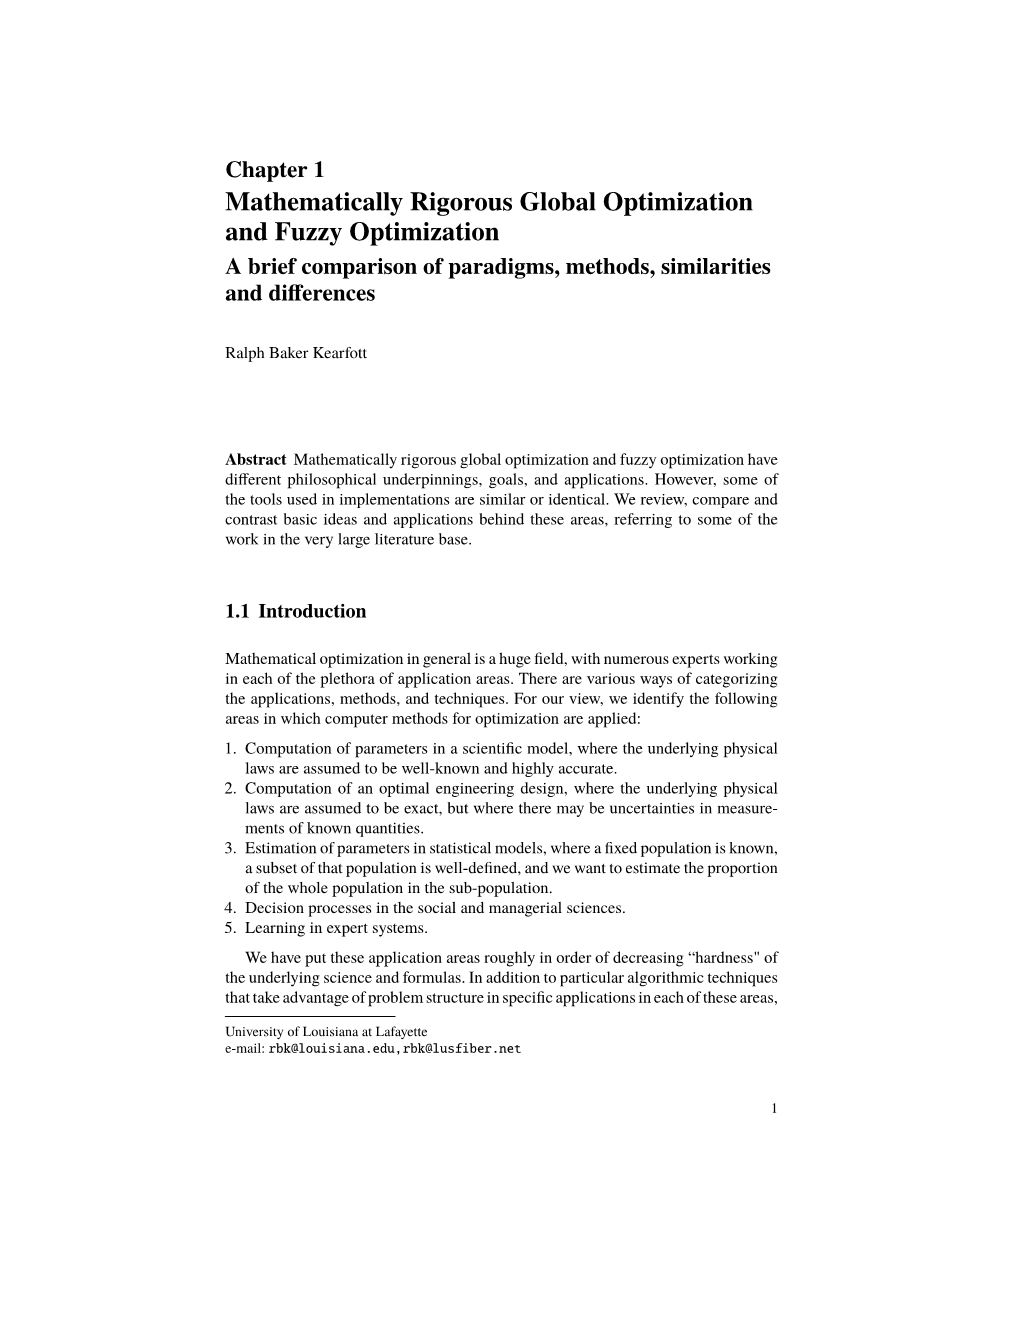 Mathematically Rigorous Global Optimization and Fuzzy Optimization a Brief Comparison of Paradigms, Methods, Similarities and Diﬀerences